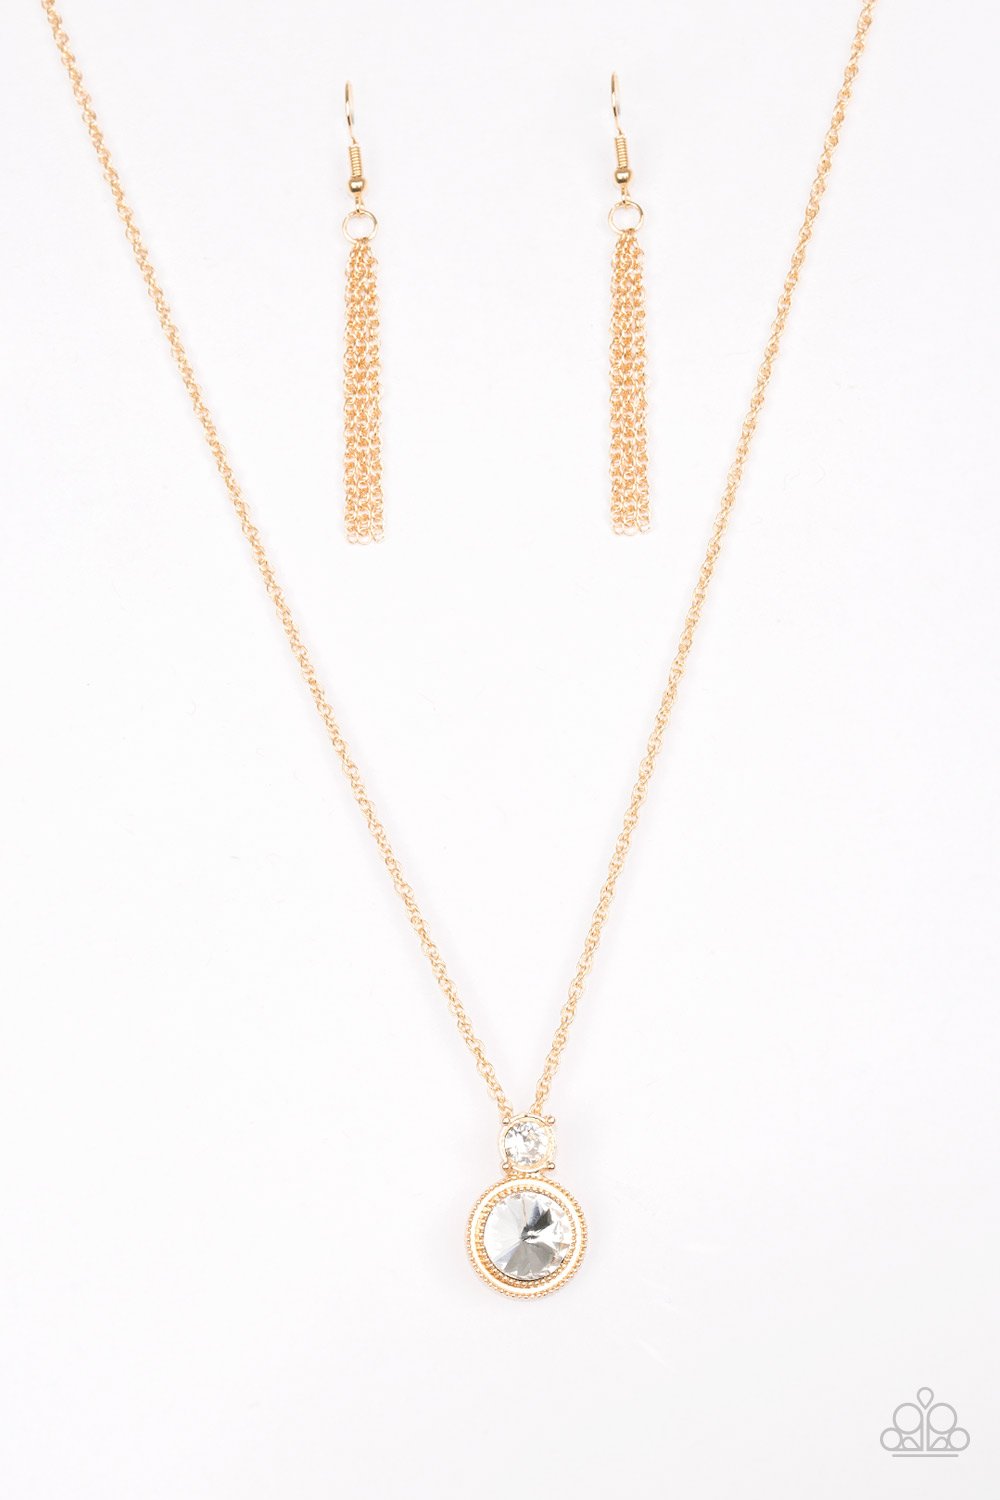 Date Night Dazzle - gold necklace